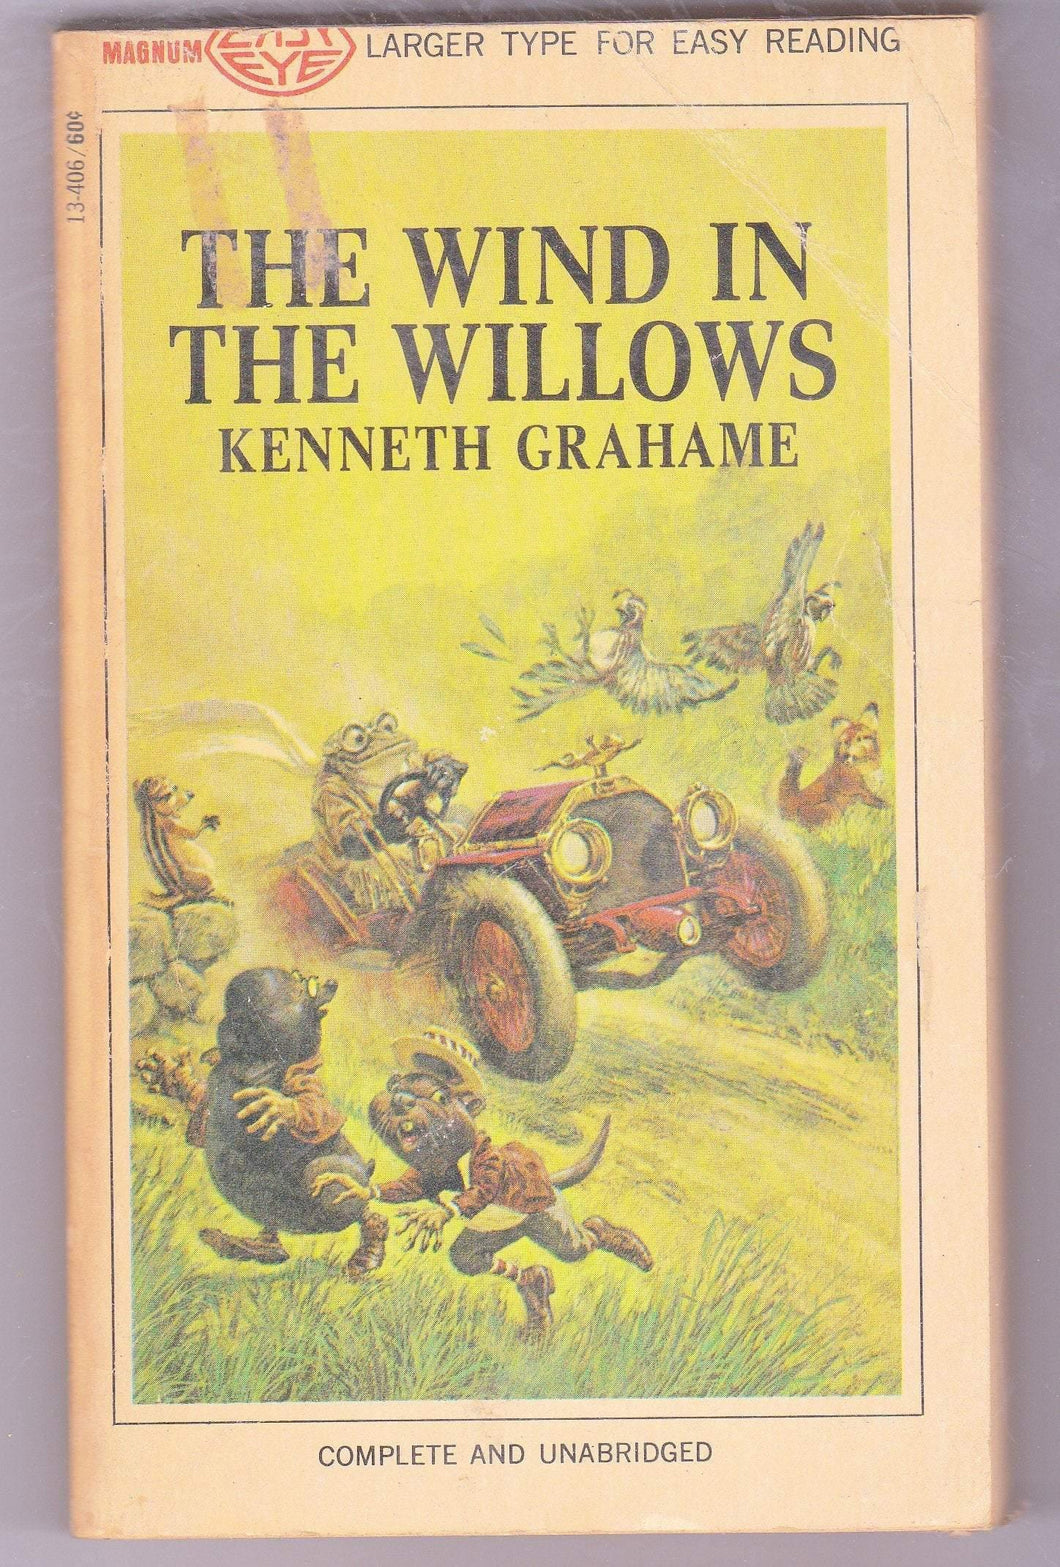 The Wind In The Willows Kenneth Grahame Magnum Easy Eye Edition 1967 Paperback Book - TulipStuff